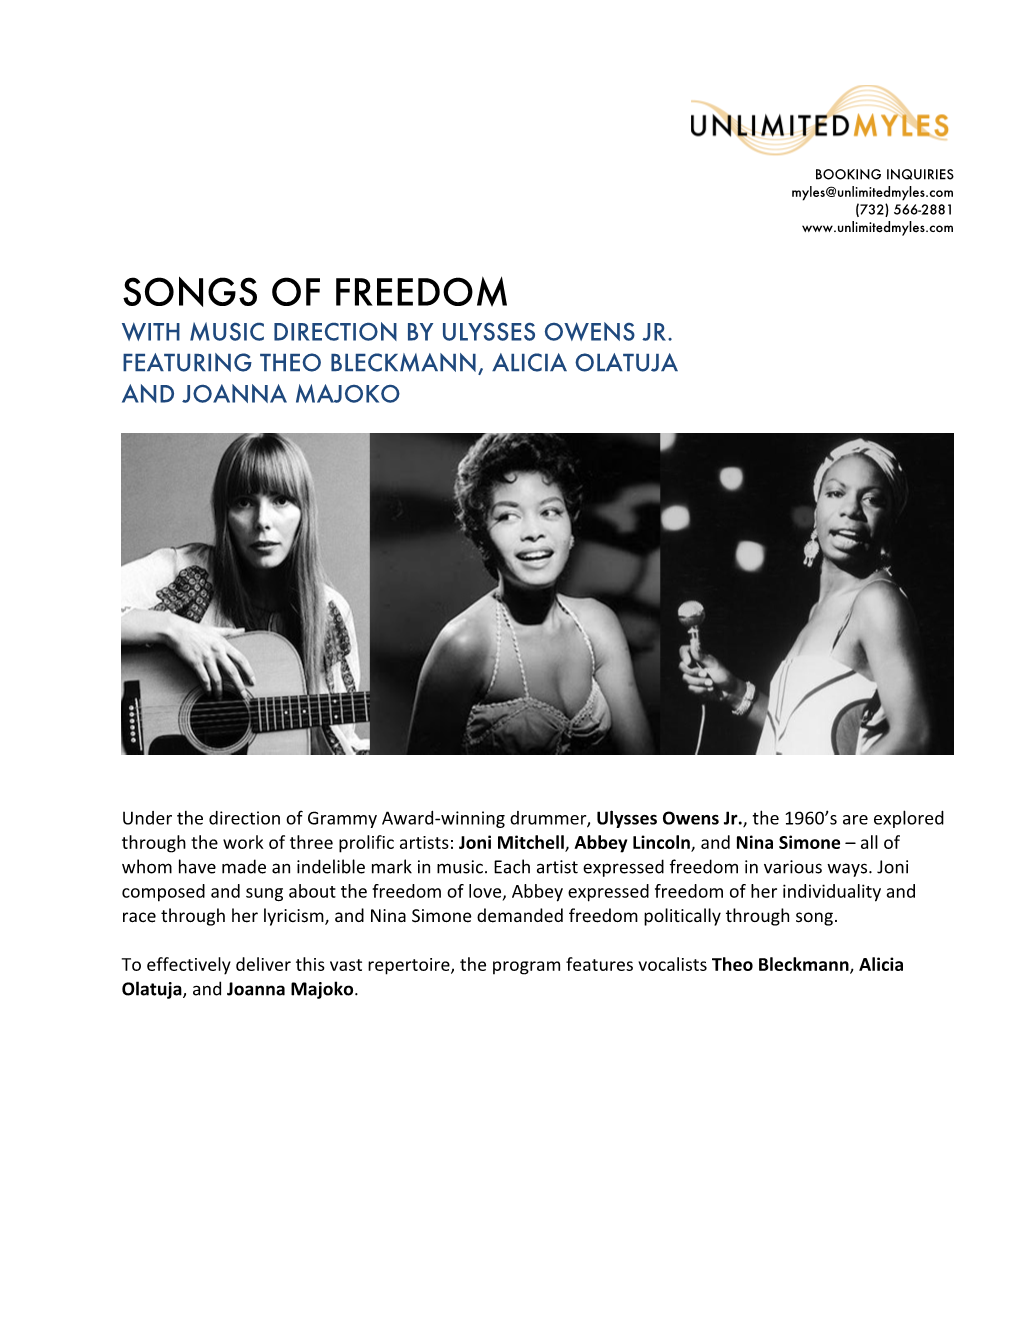 Songs of Freedom with Music Direction by Ulysses Owens Jr